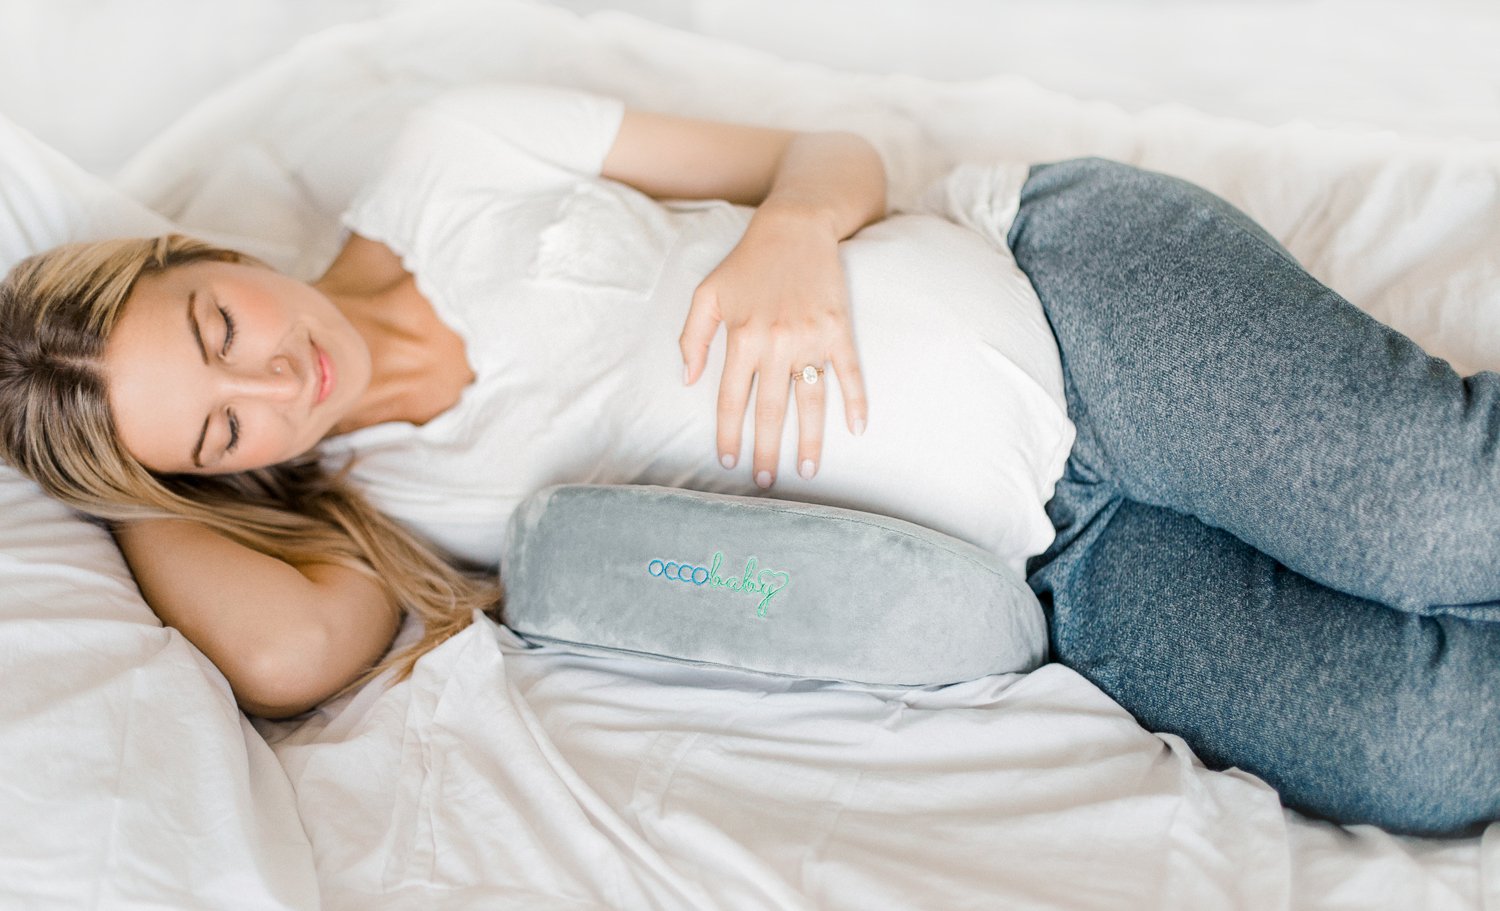 OCCObaby Pregnancy Wedge Pillow